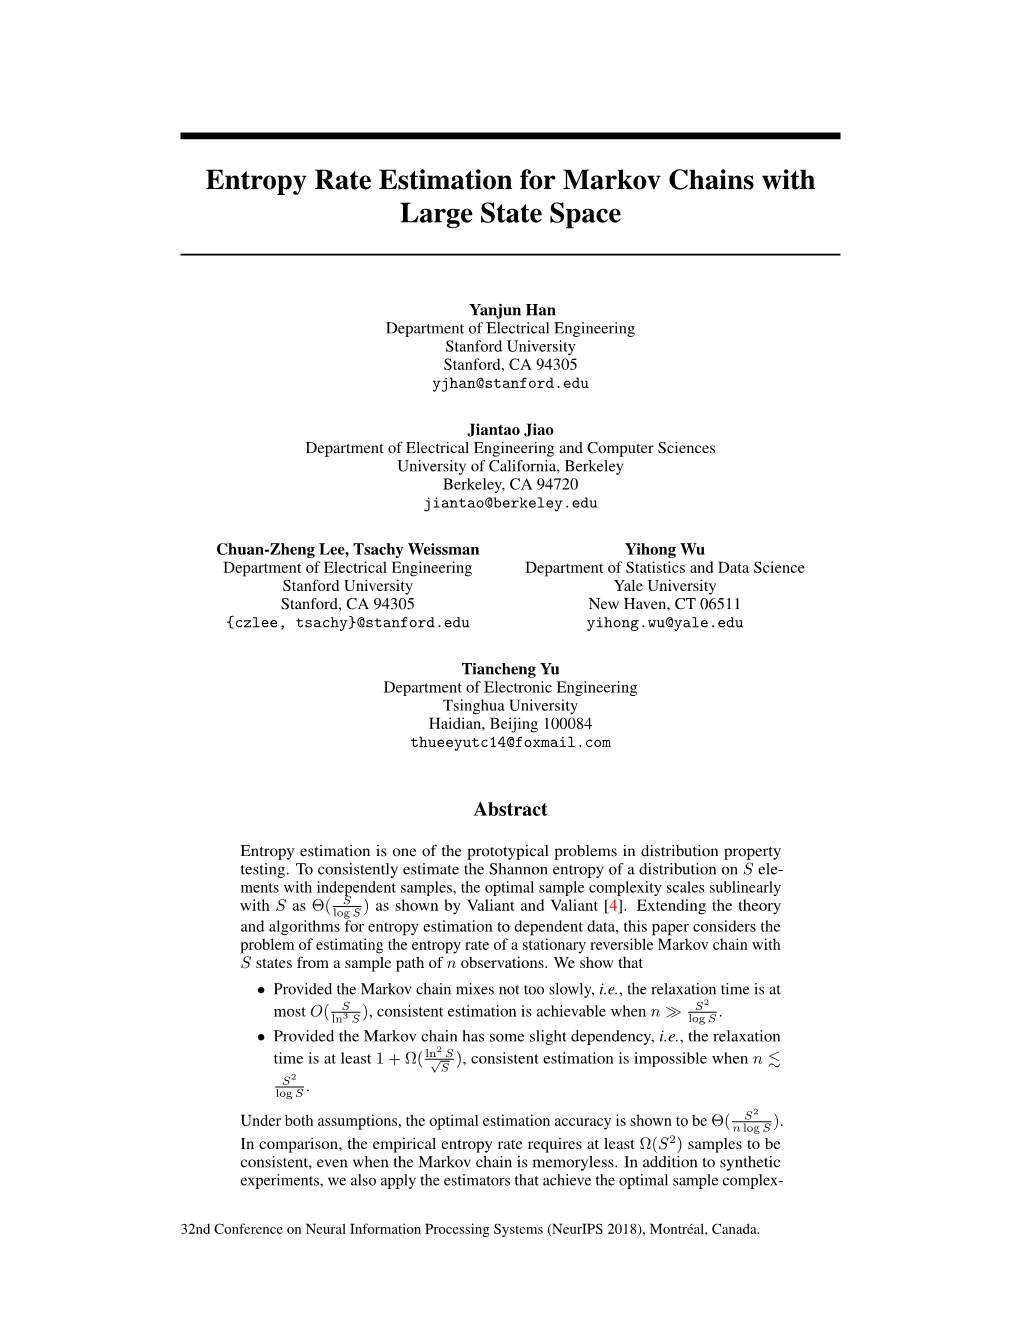 Entropy Rate Estimation for Markov Chains with Large State Space